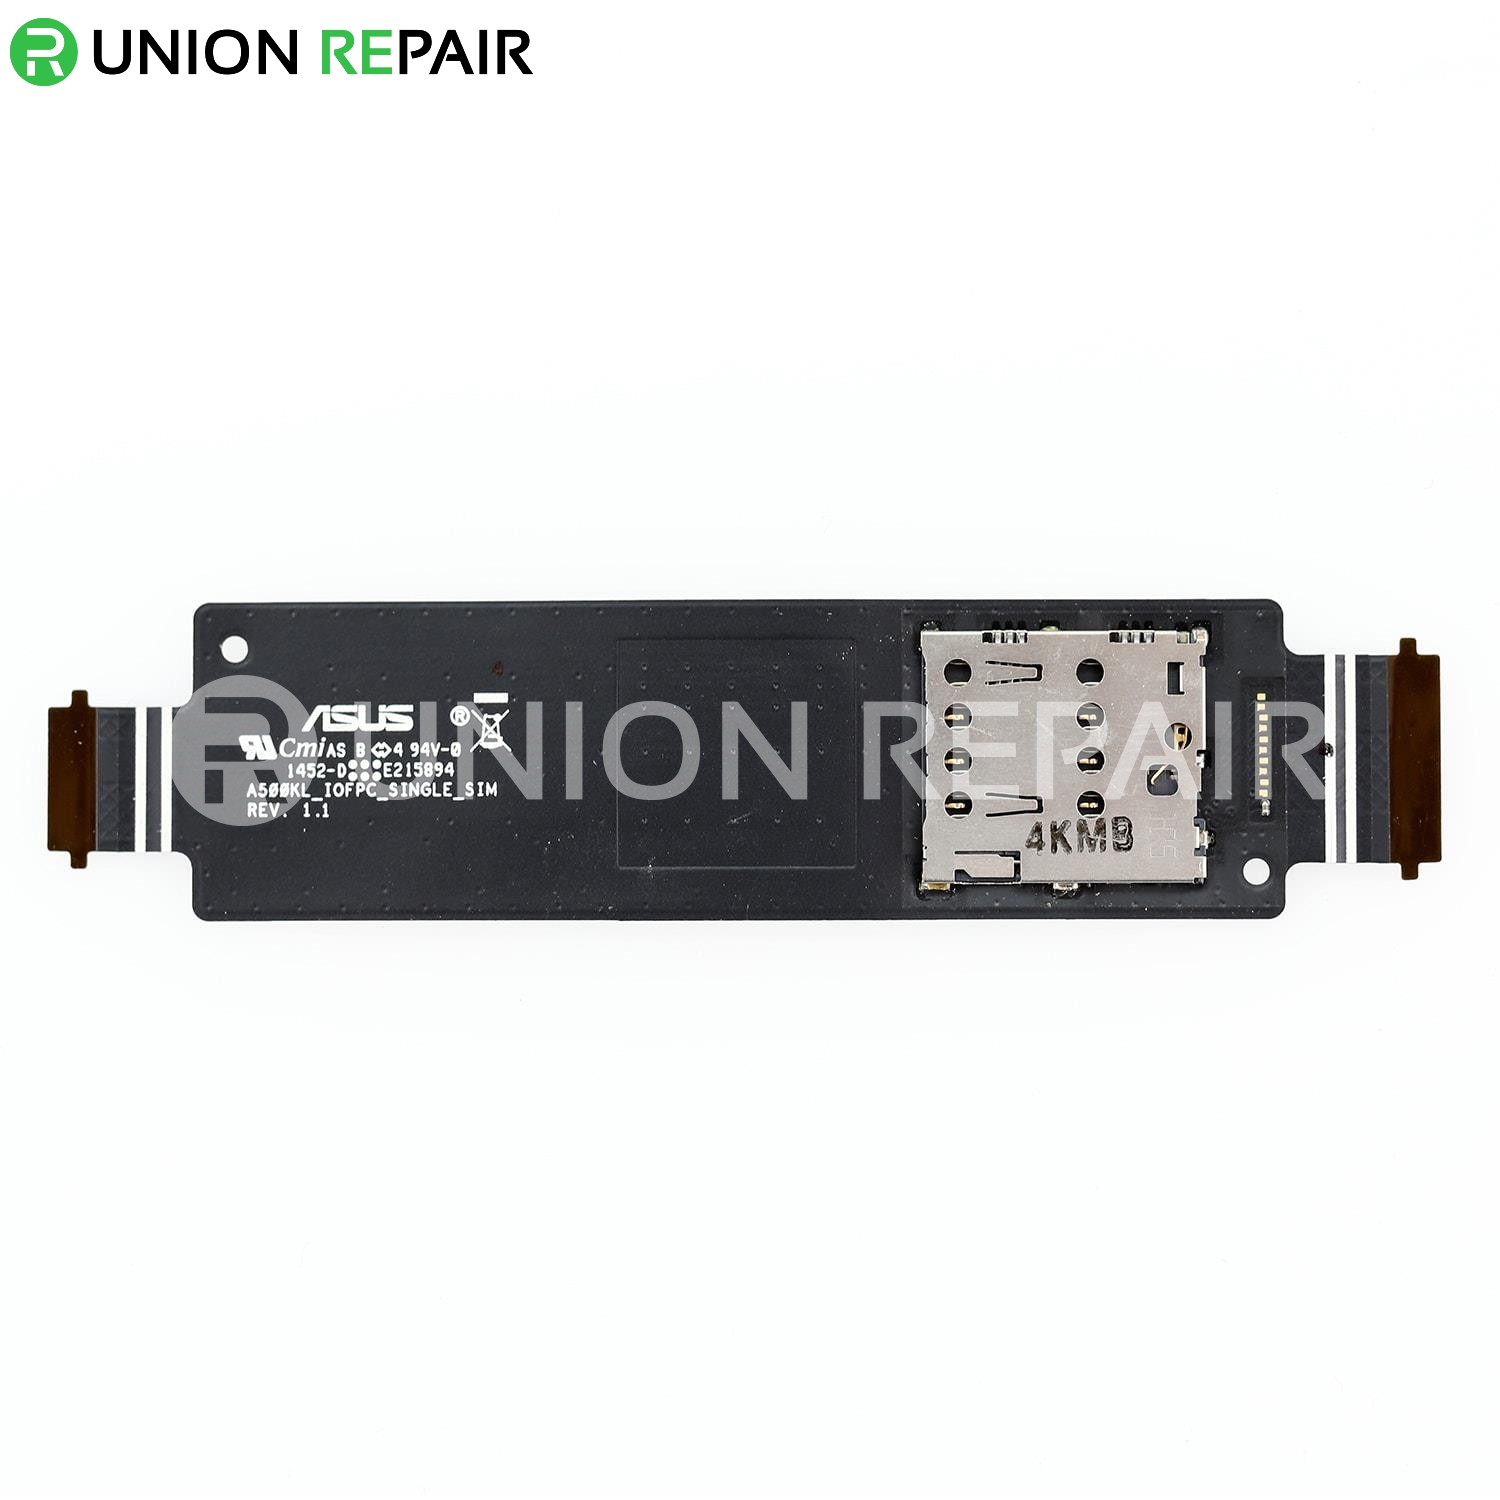 Replacement for Asus Zenfone 5 A500CG Single Sim Card Slot